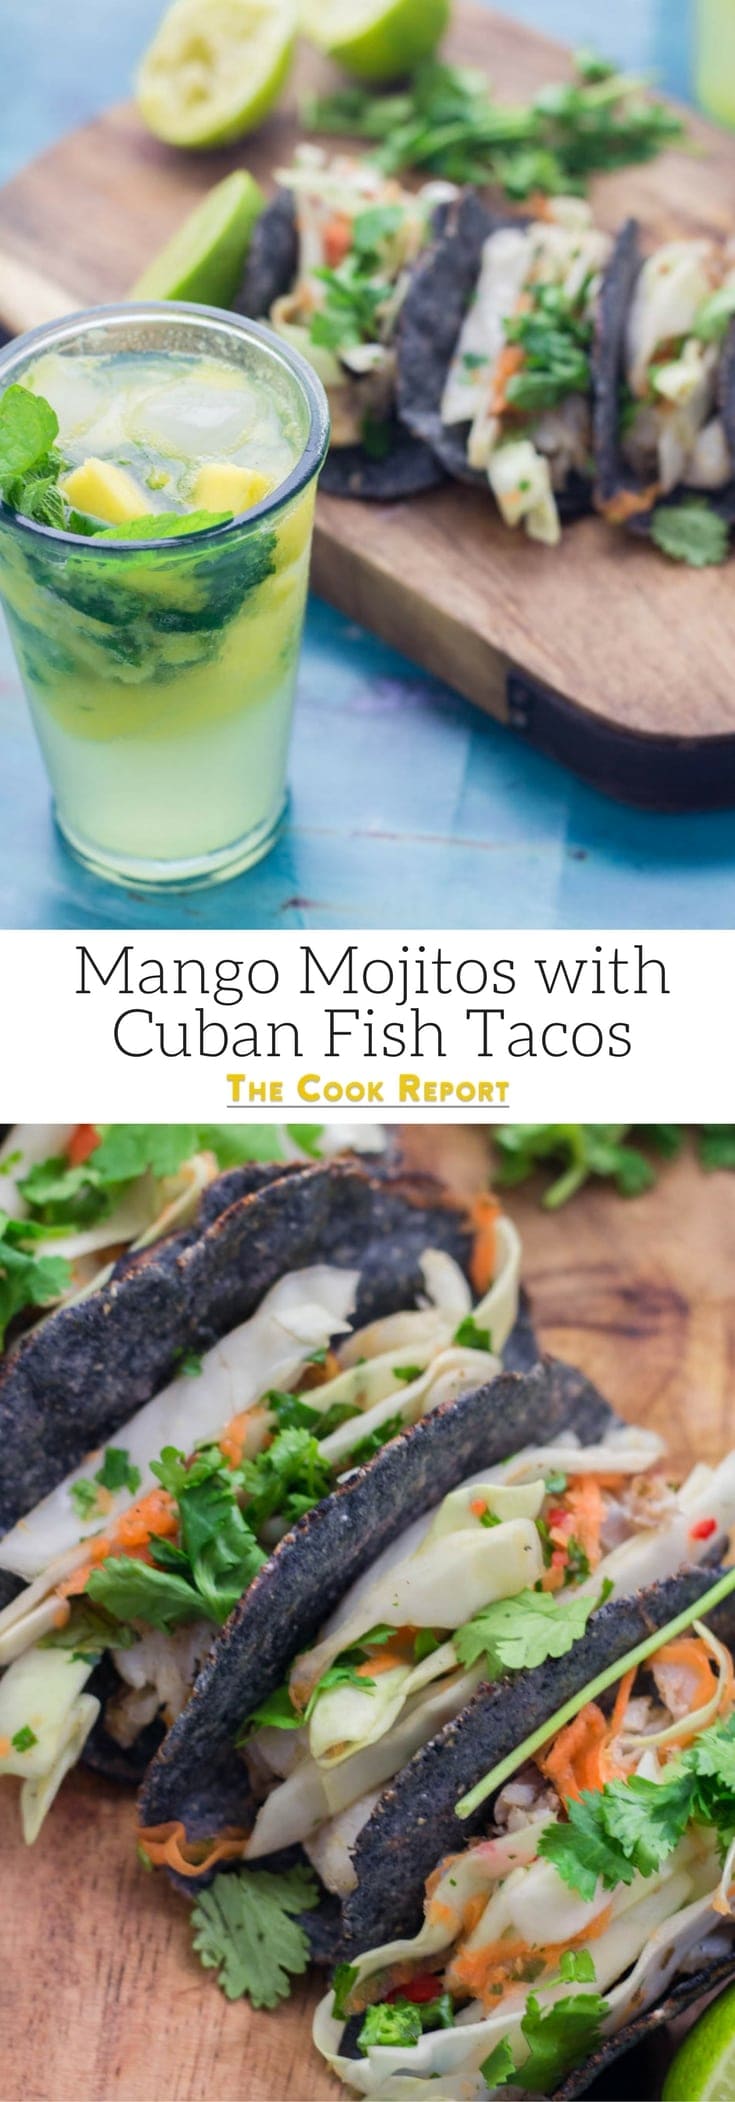 Serve these mango mojitos and Cuban fish tacos at your next party! The mojito uses a classic recipe with a delicious tropical twist.